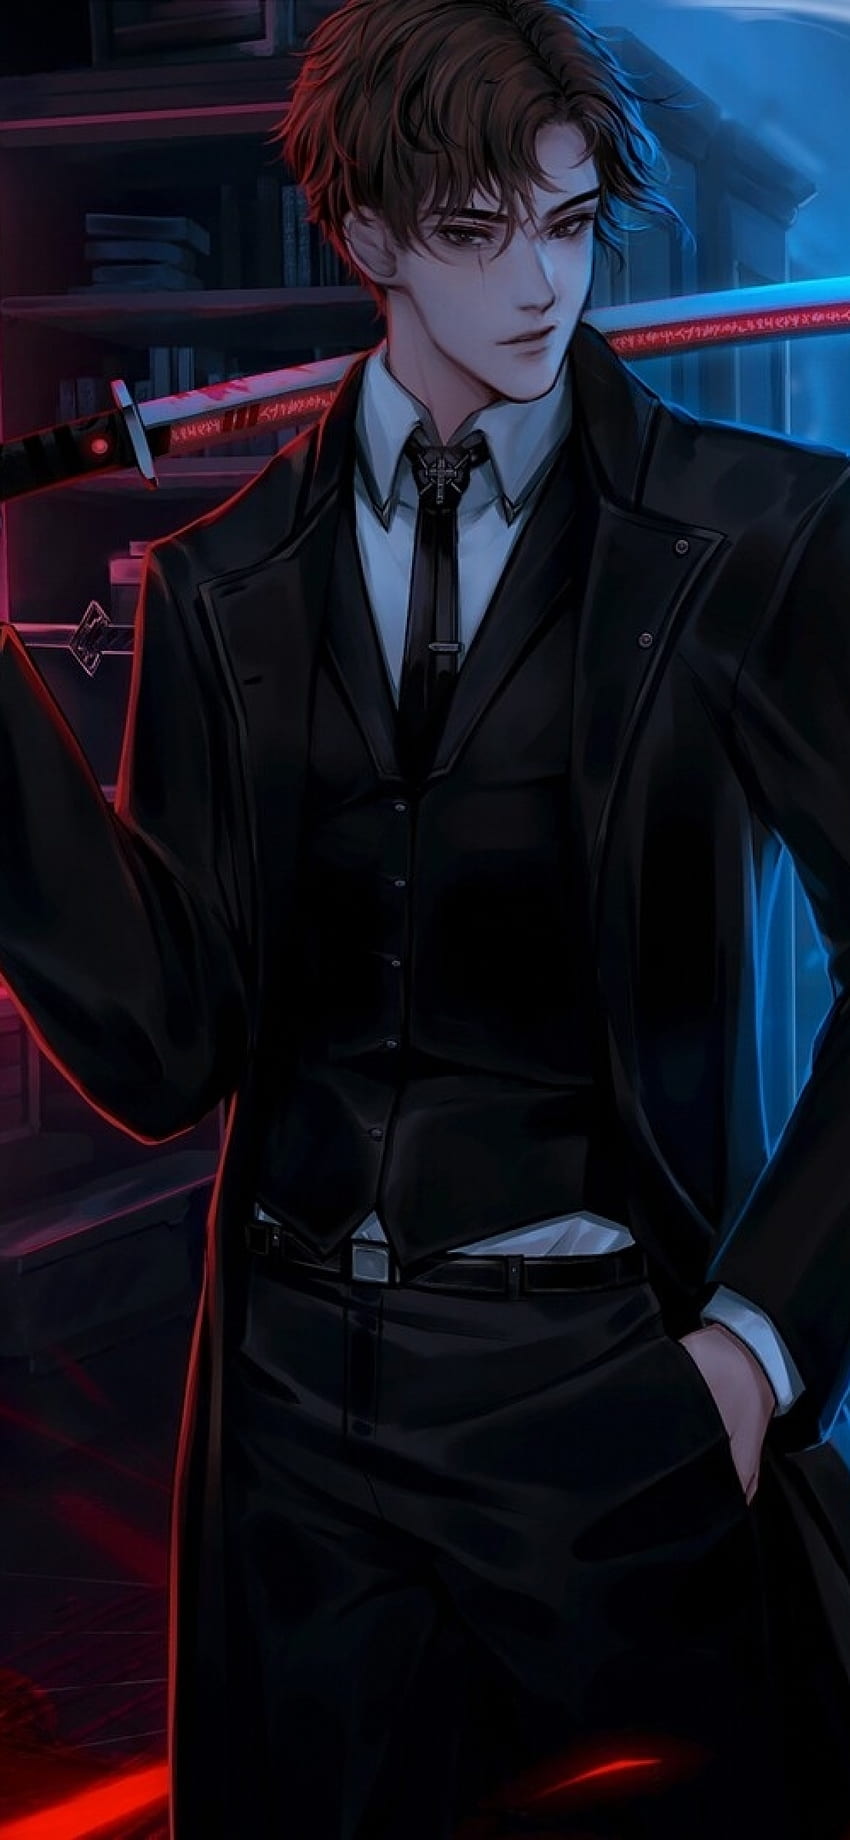 30 Anime Guys in Suits (My Favorite Characters List) - Anime Inspiration